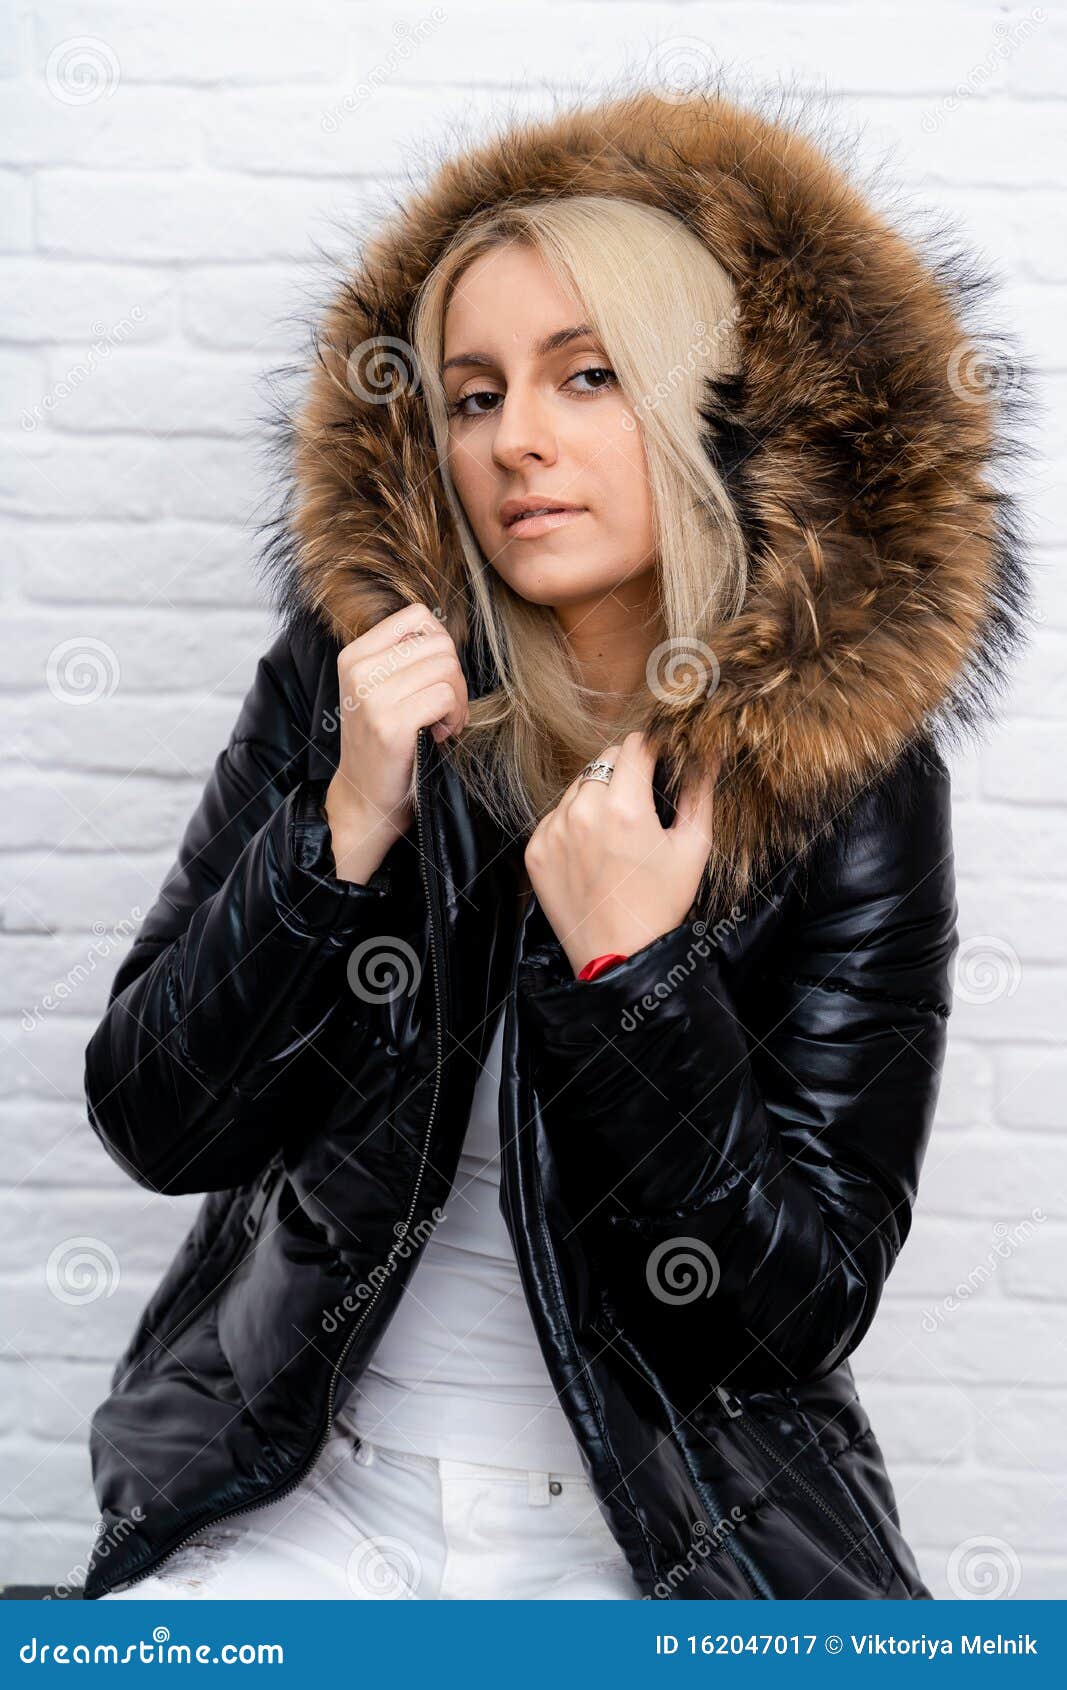 A girl in white jeans, a white blouse and a black shiny jacket with a fur hood on a white background.